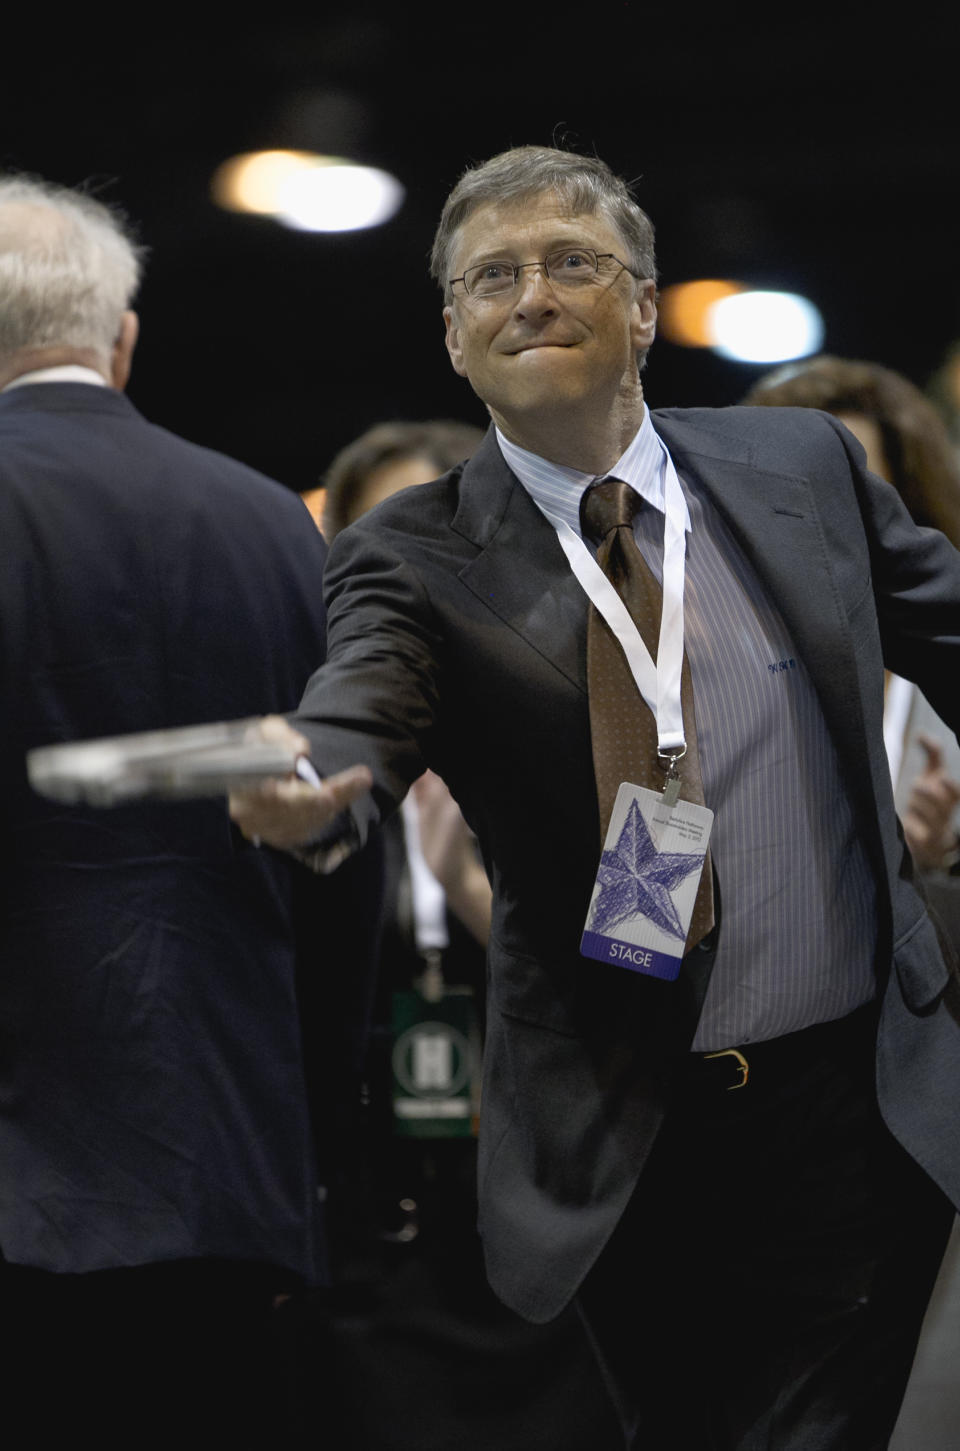 Bill Gates, a director with Berkshire Hathaway, tosses a newspaper during a newspaper tossing competition in Omaha, Neb., Saturday, May 5, 2012. Berkshire Hathaway is holding it's annual shareholders meeting this weekend. (AP Photo/Nati Harnik)